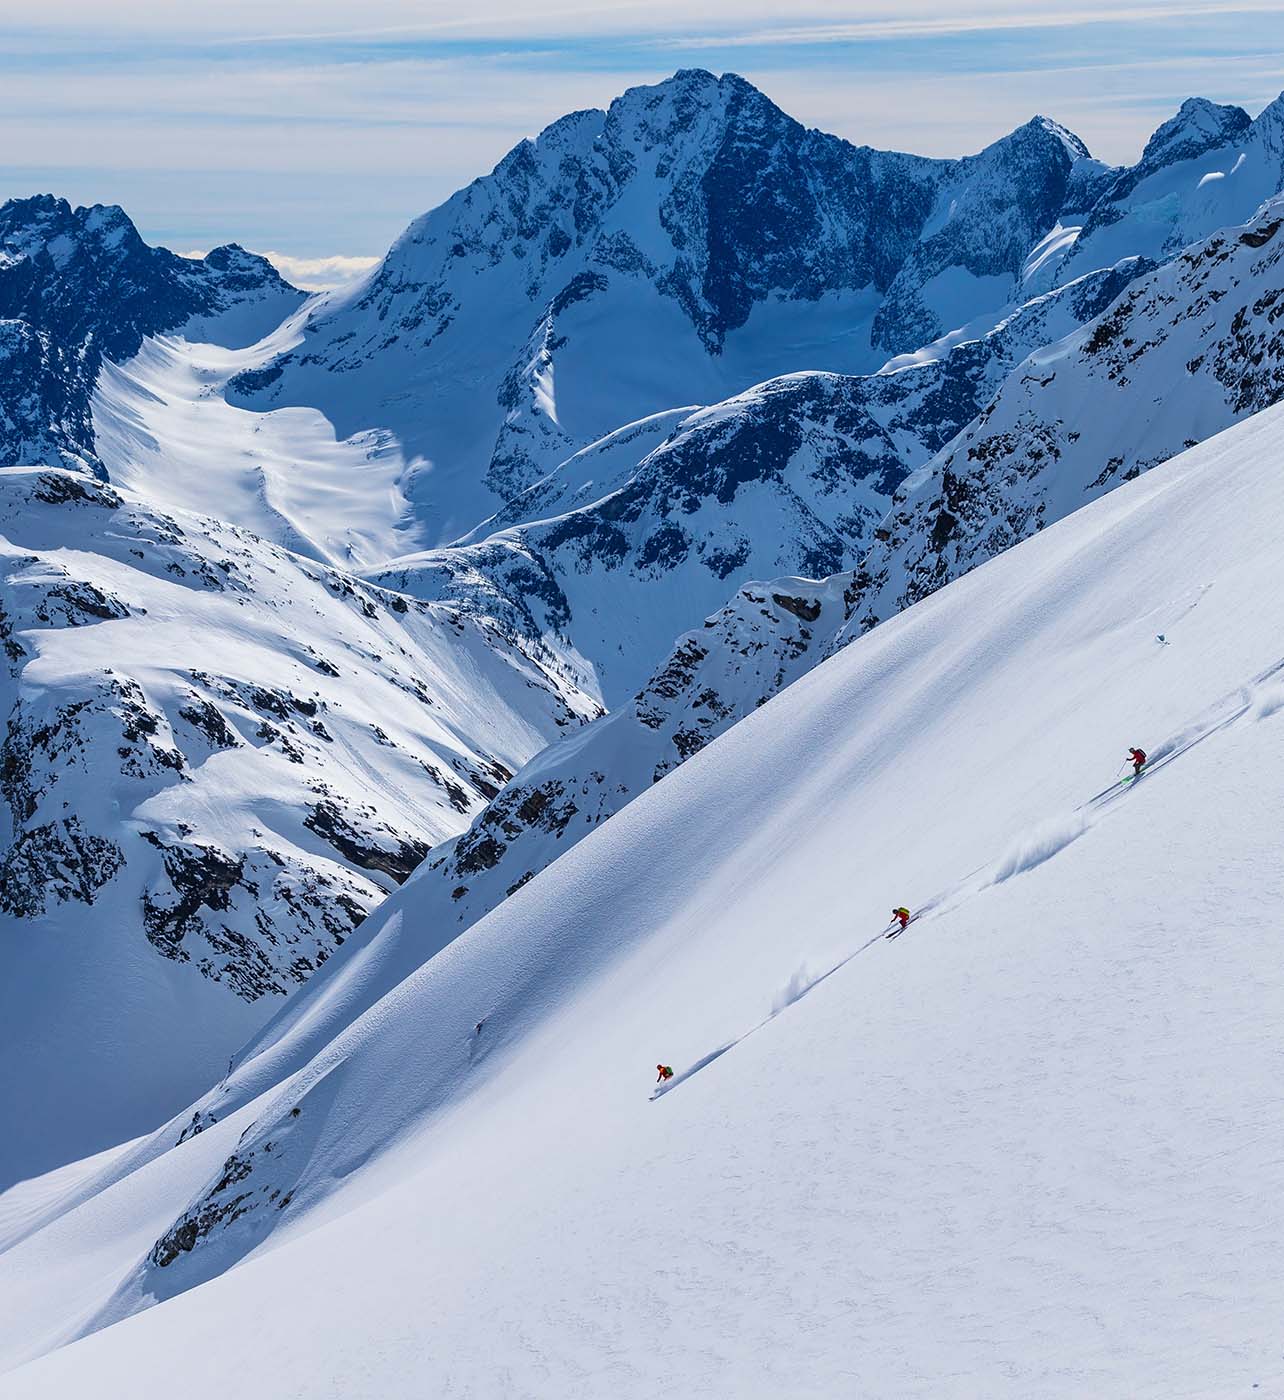 Skiers making their way down the mountainside in British Columbia